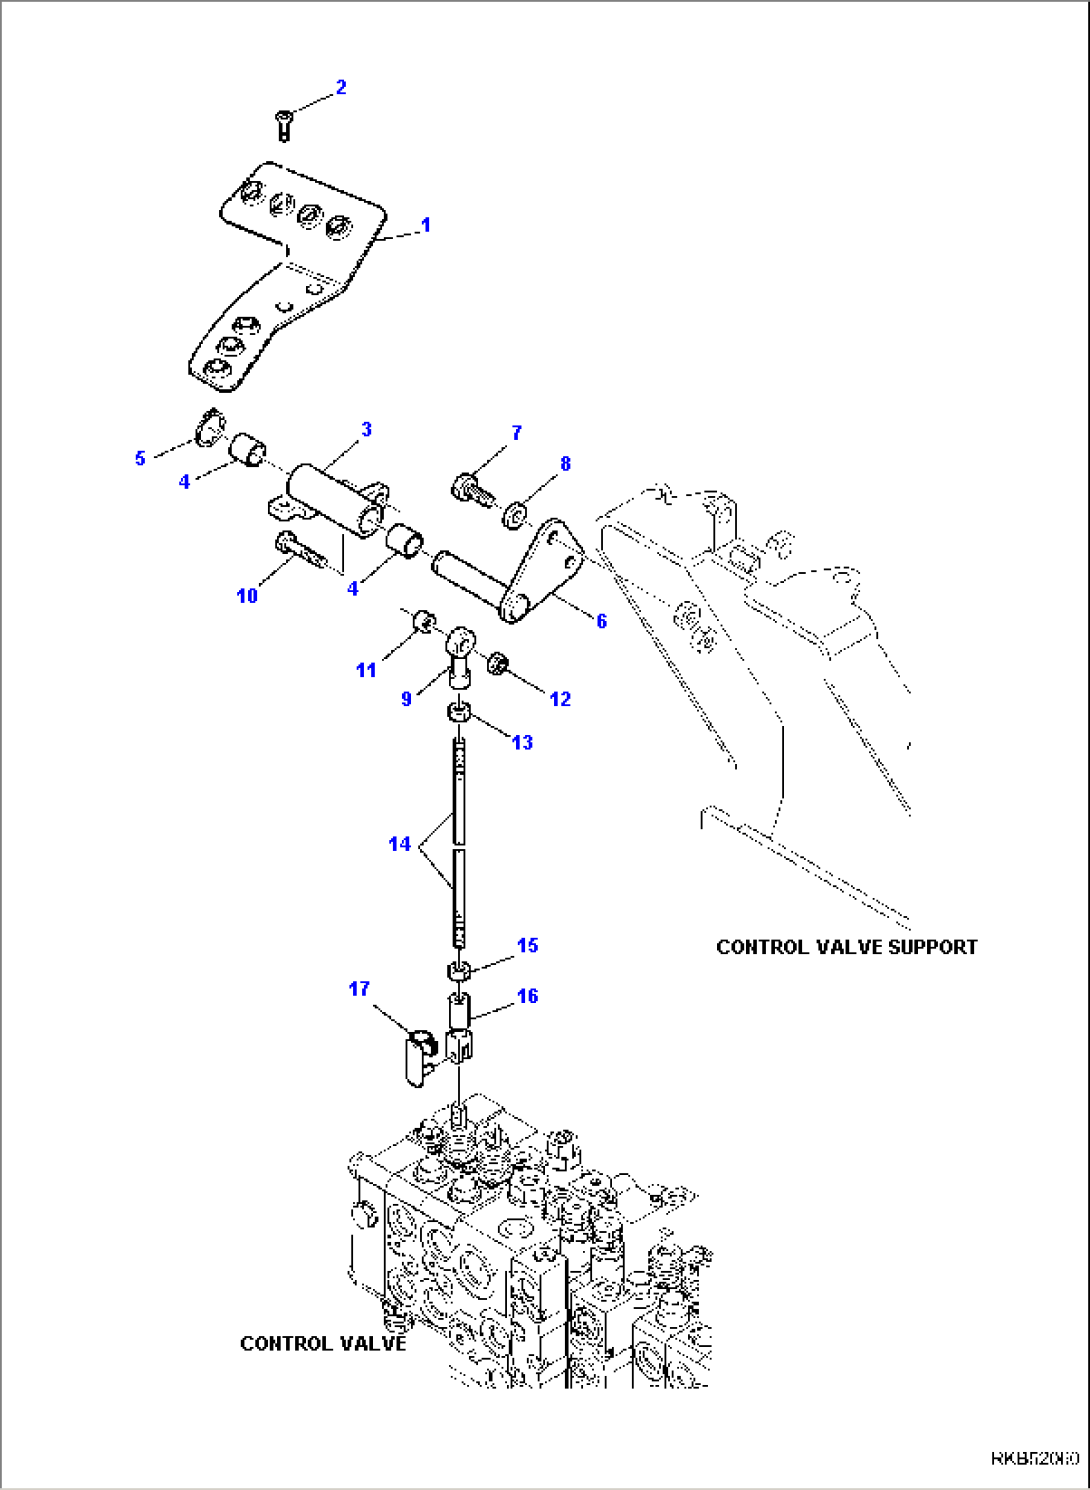 SIDE DIGGING BOOM CONTROL PEDAL